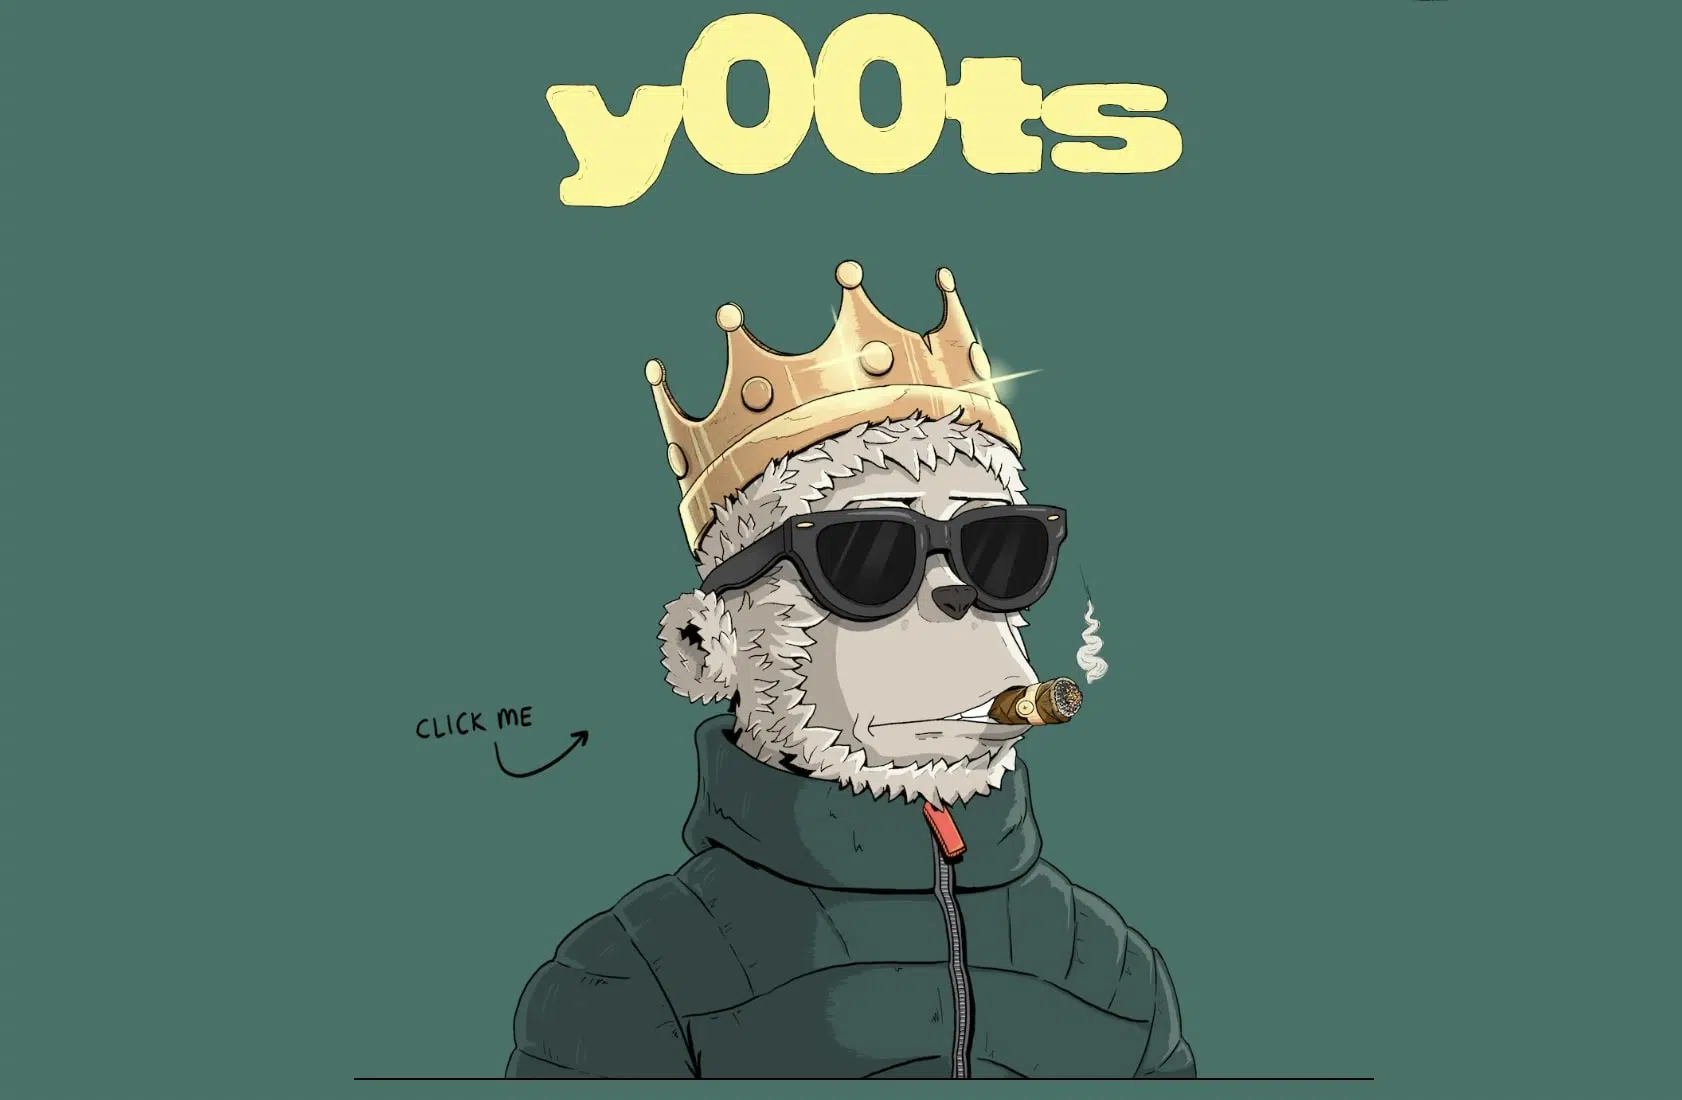 y00ts NFT of Yeti-like avatar in sunglasses and green jacket